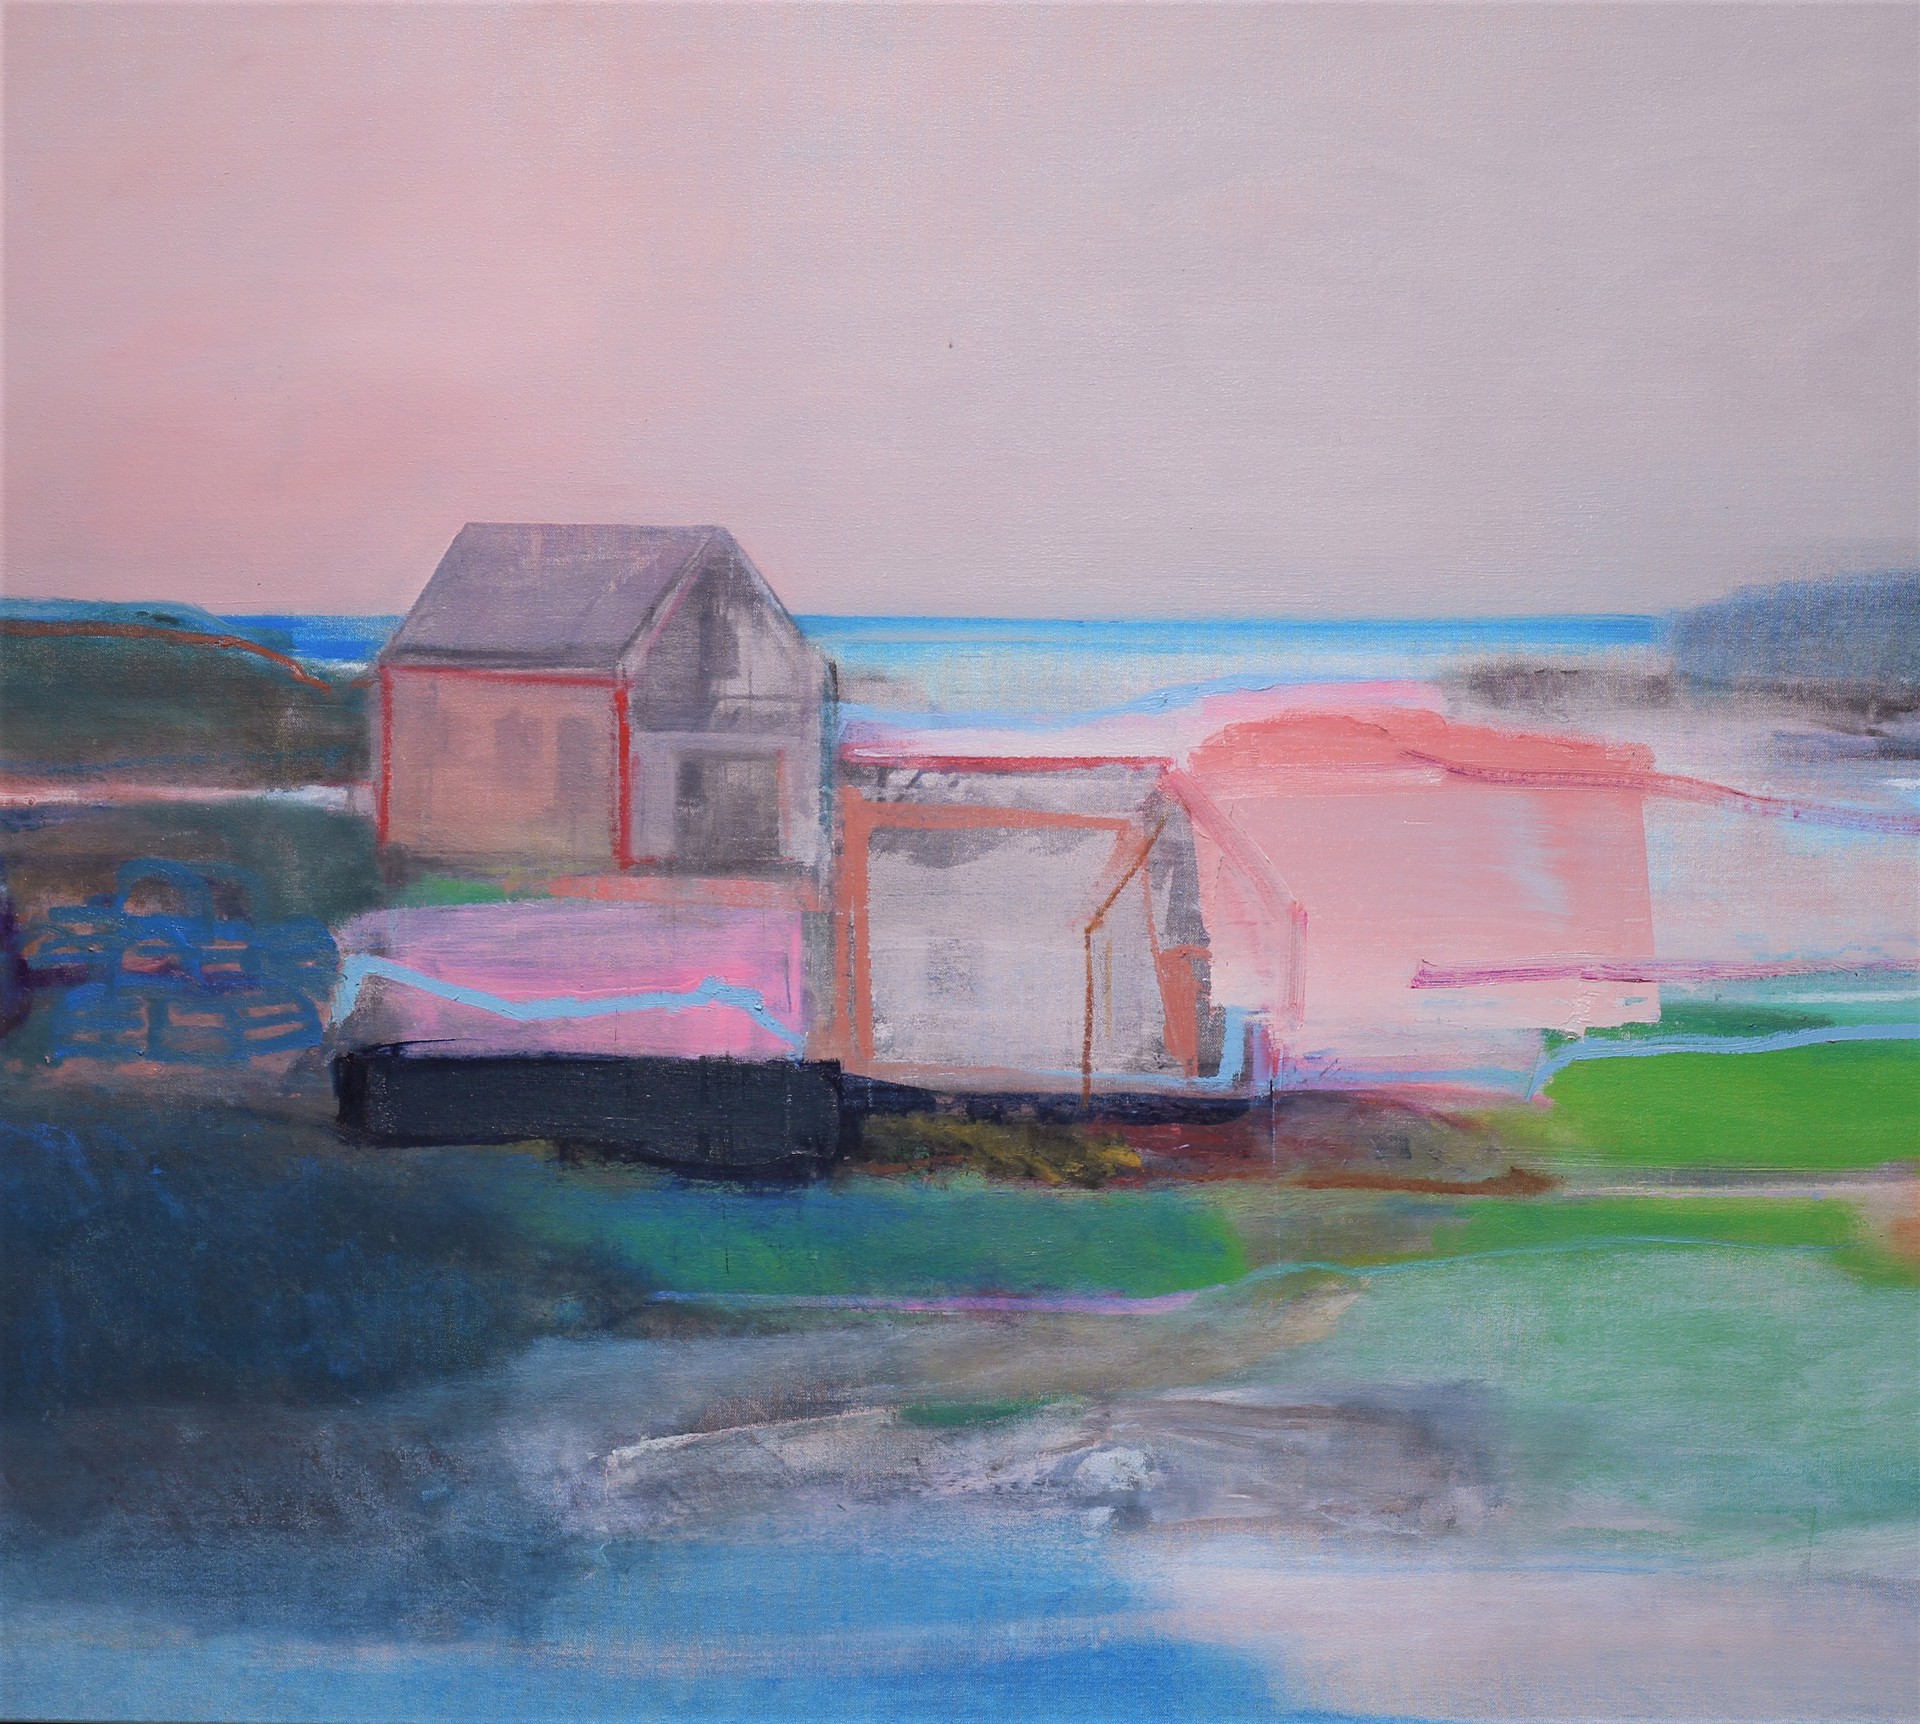 LAST DAYS OF THE SUMMER by CHRISTINA THWAITES (Landscape)